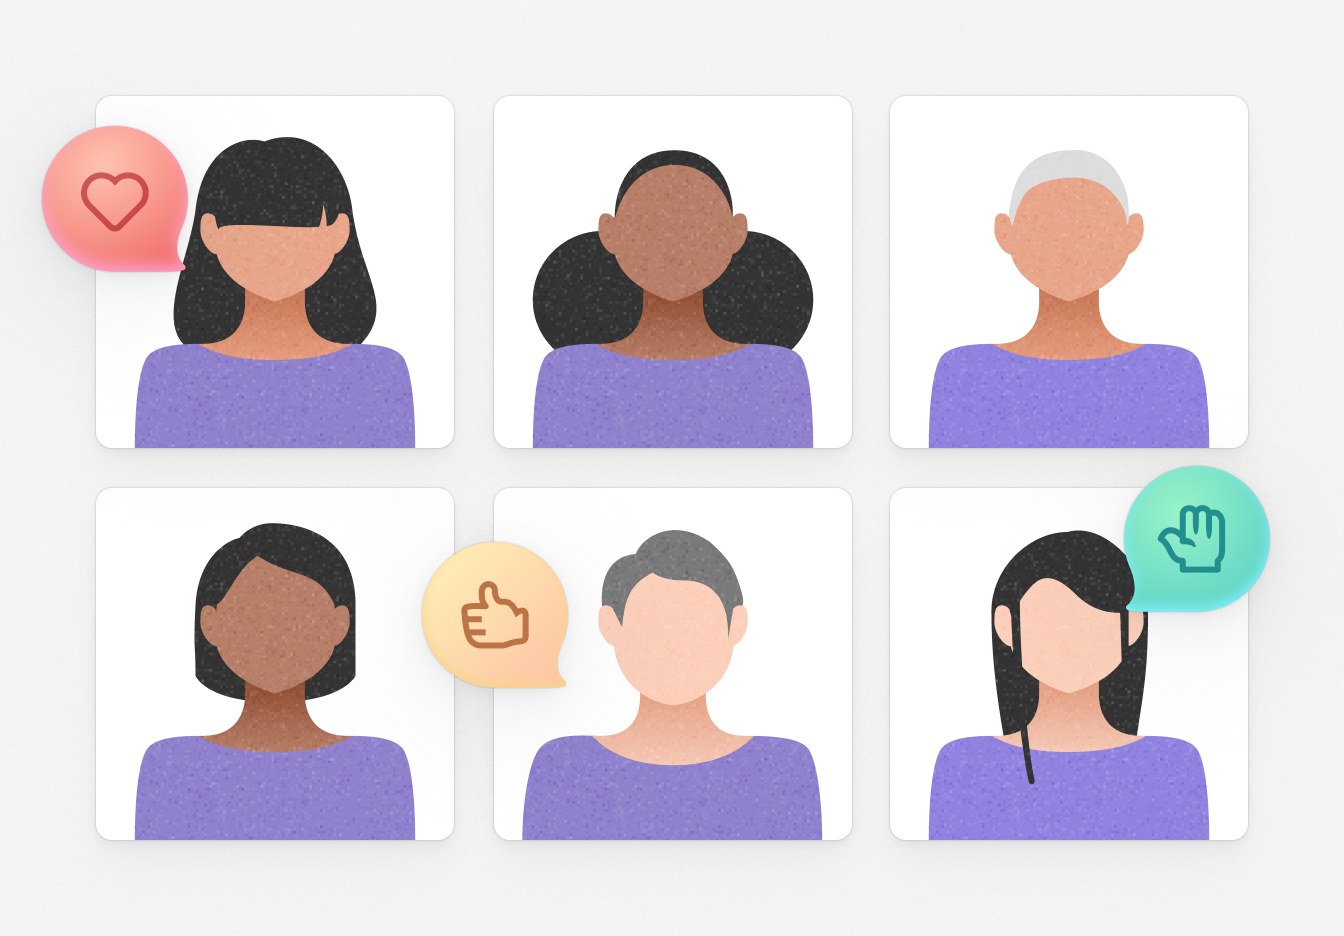 A grid of 6 stylized people. 3 of them with bubbles over their heads. One with a heart, one with a thumbs-up, and one with a hand raised.